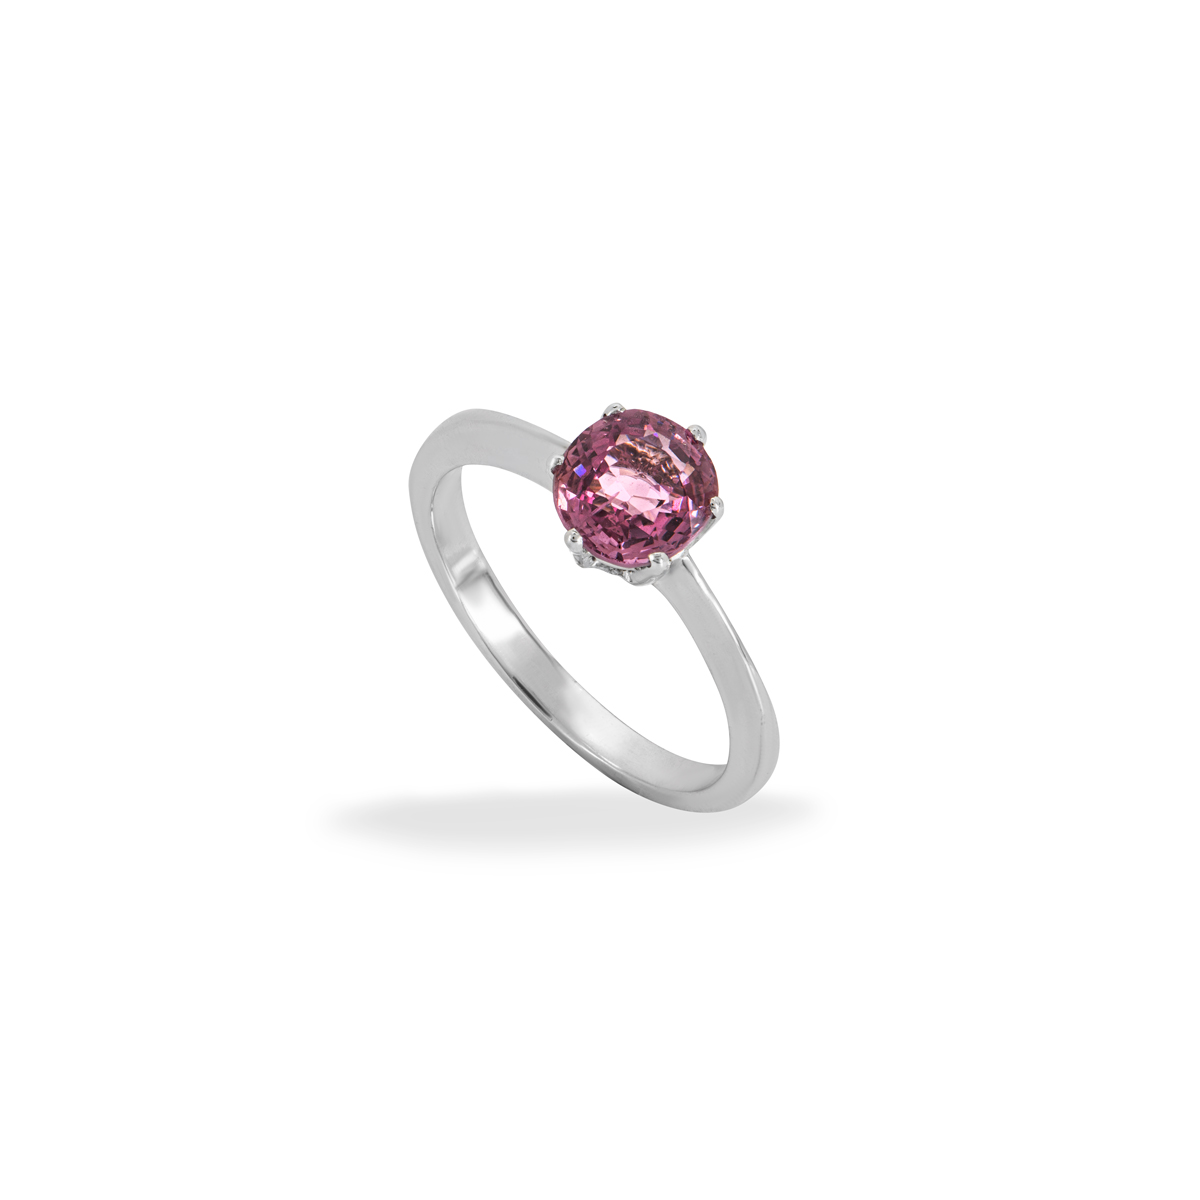 White Gold Pink Spinel Ring 1.20ct